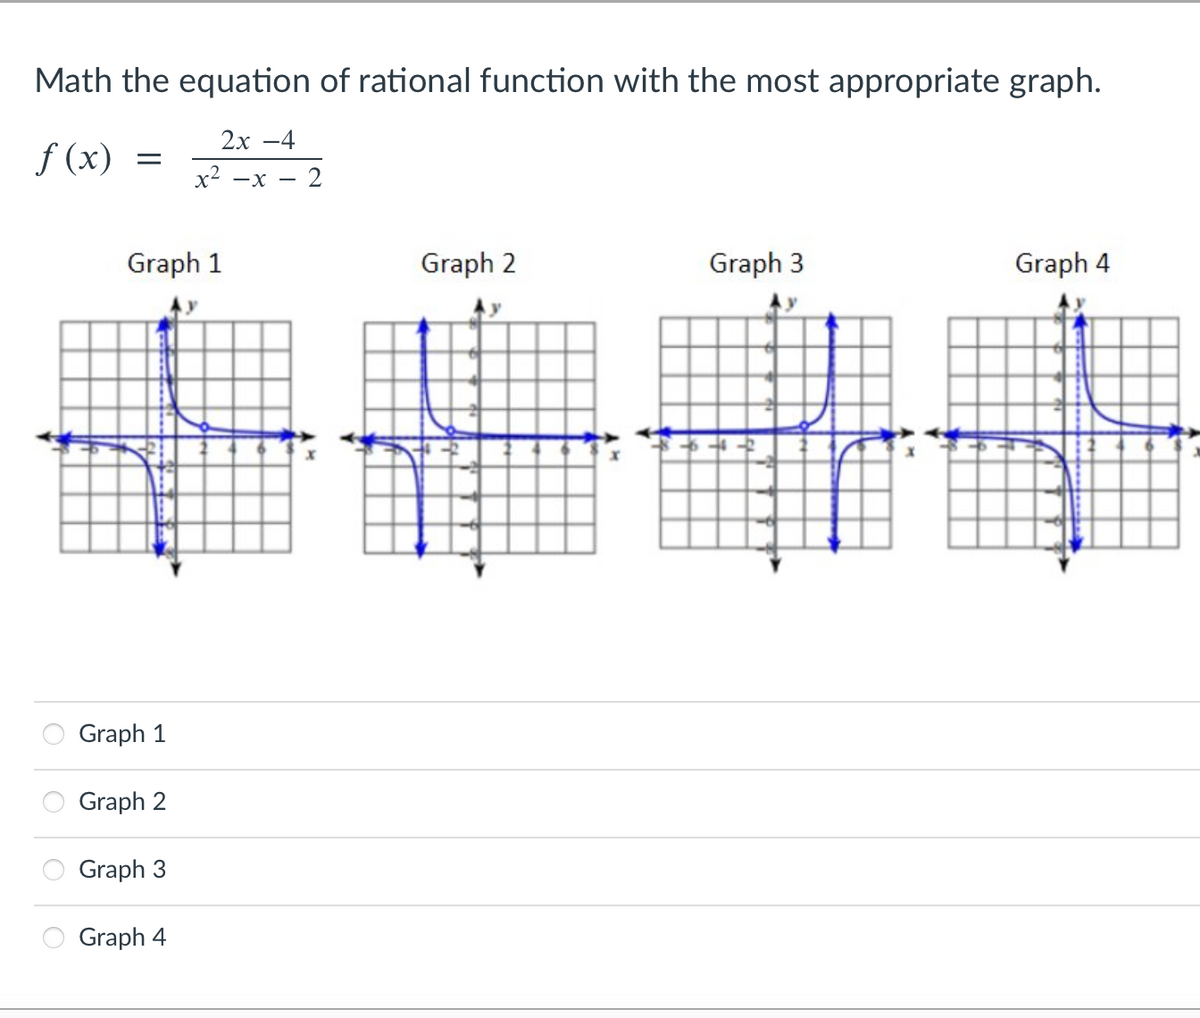 Math the equation of rational function with the most appropriate graph.
2х —4
f (x)
х2 —х —
2
Graph 1
Graph 2
Graph 3
Graph 4
Graph 1
Graph 2
Graph 3
Graph 4
